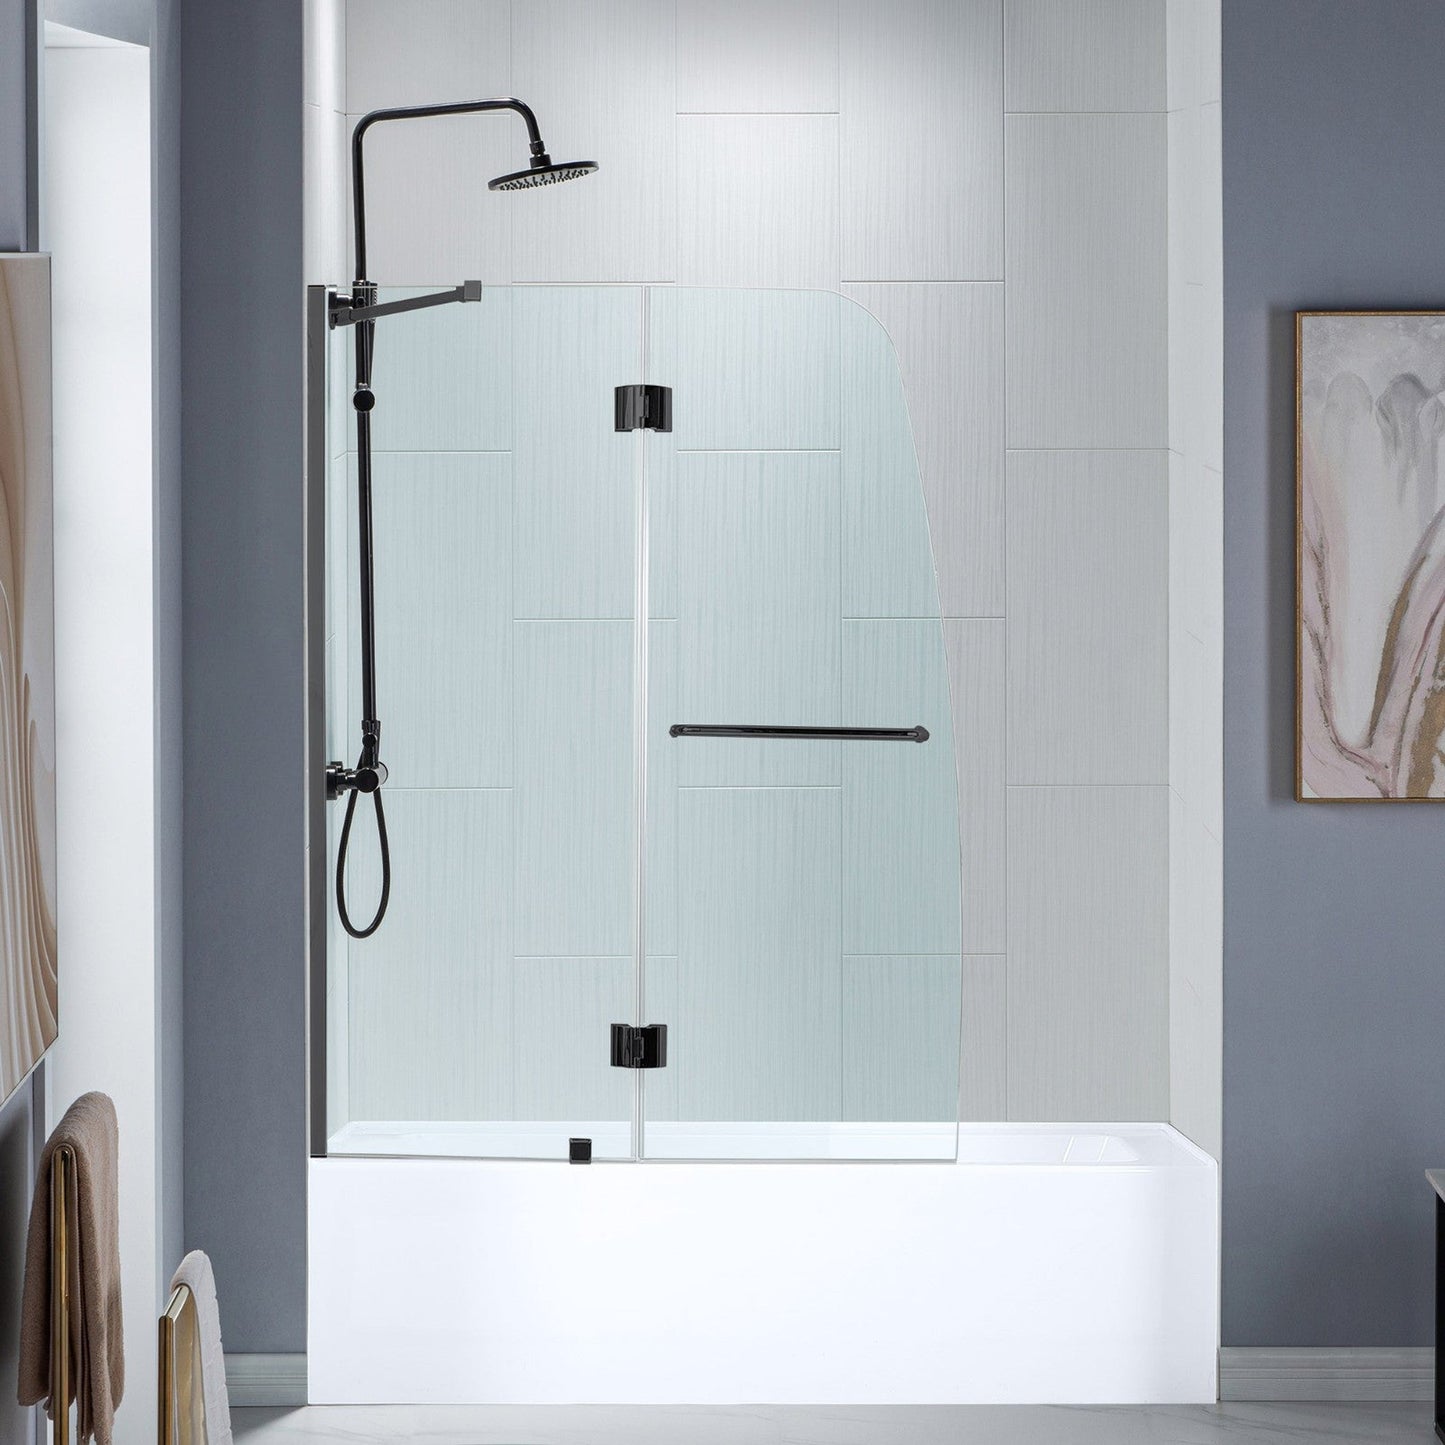 WoodBridge 49" W x 58" H Clear Tempered Glass Frameless Hinged Shower Tub Door With Matte Black Support Bar and Hardware